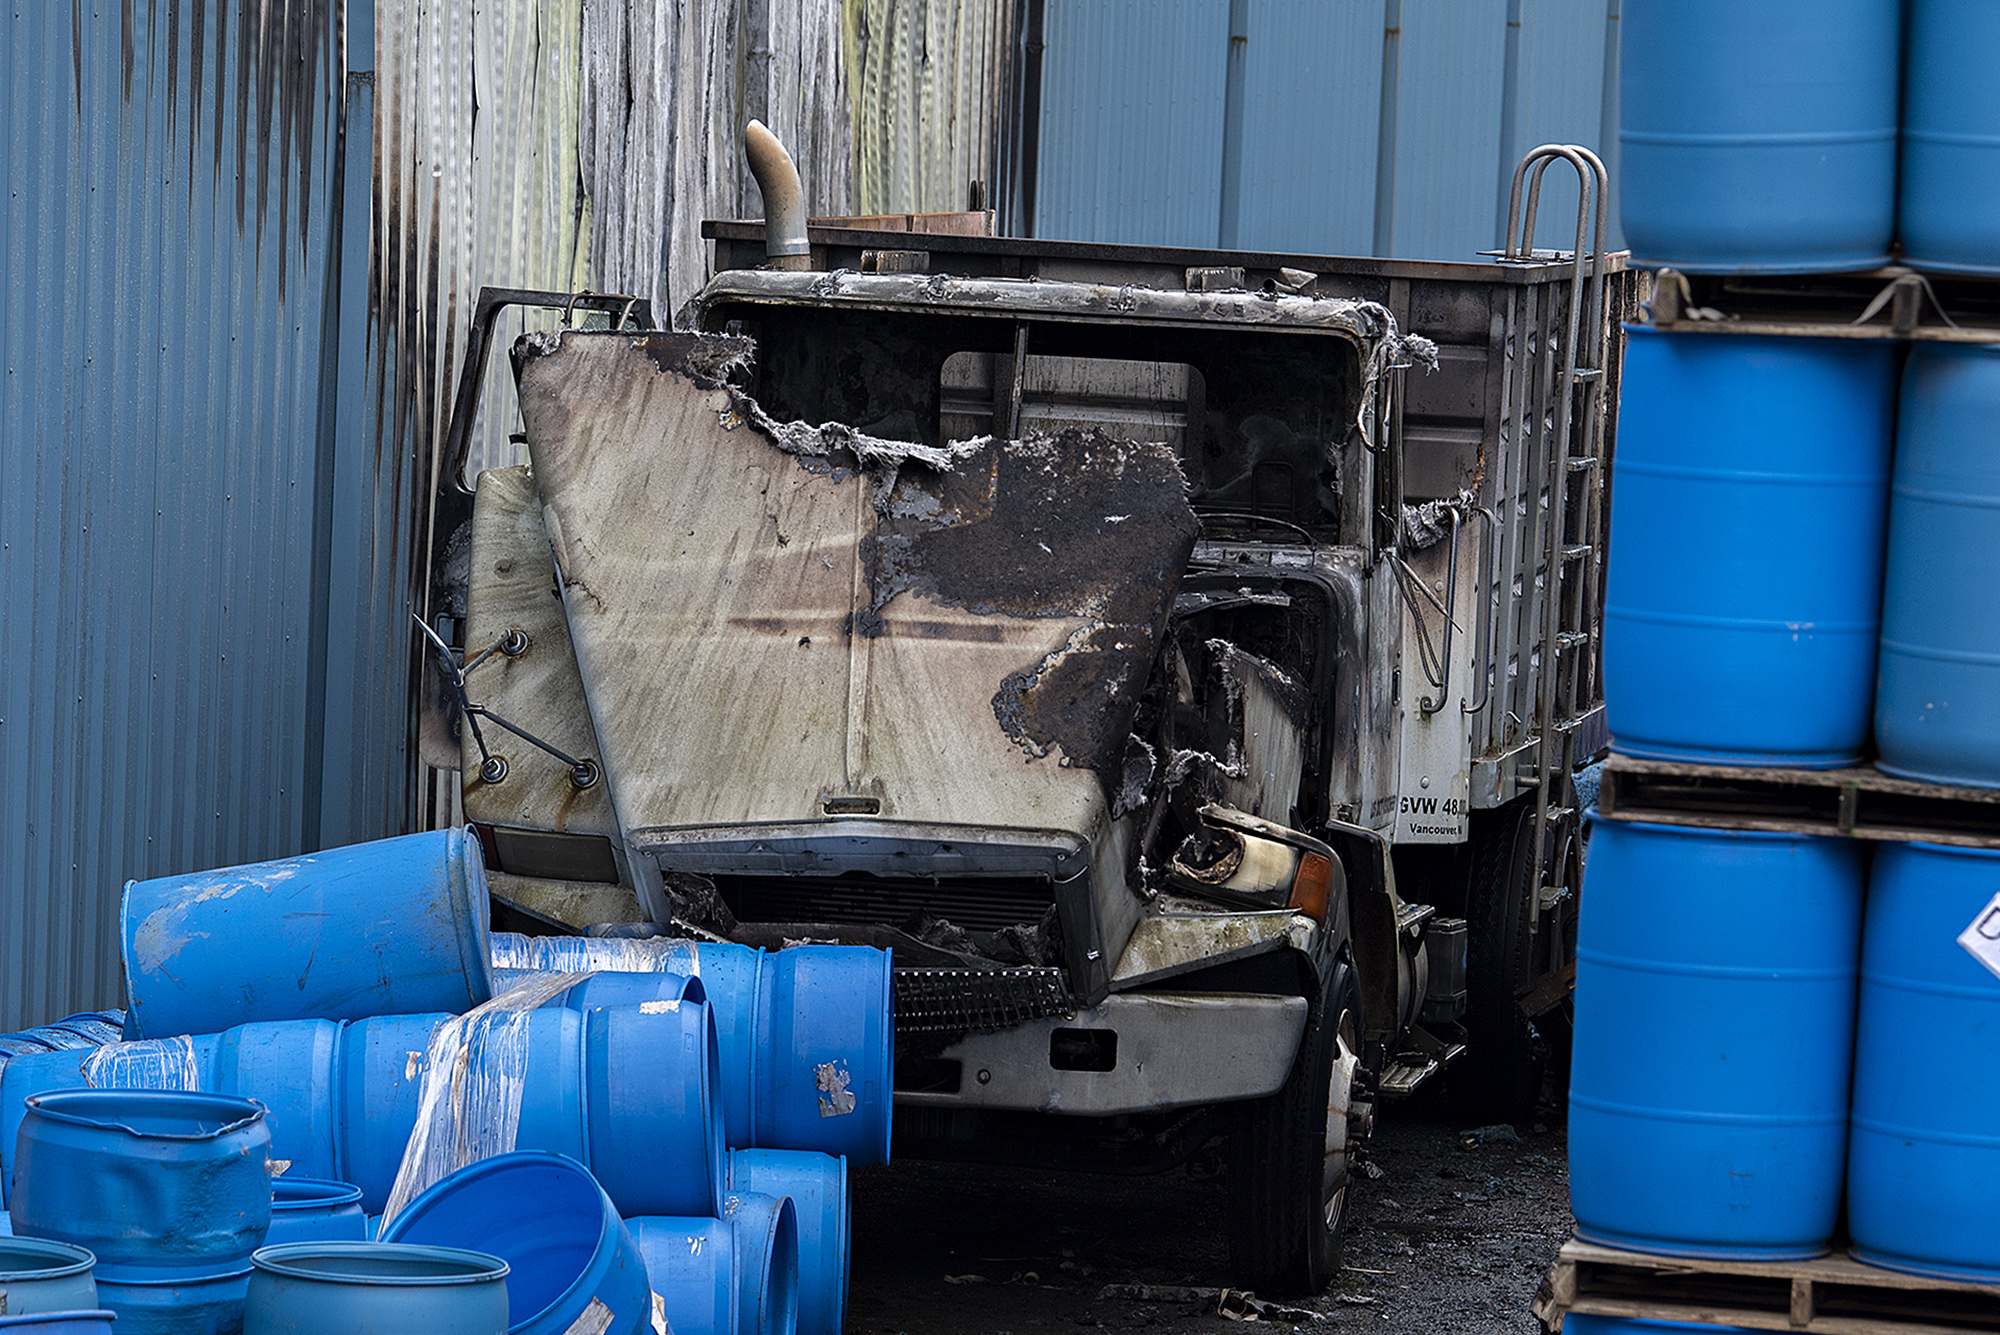 More than 40 firefighters battled a two-alarm fire at Northwest Packing Co. at the Port of Vancouver on Tuesday morning, March 29, 2022.